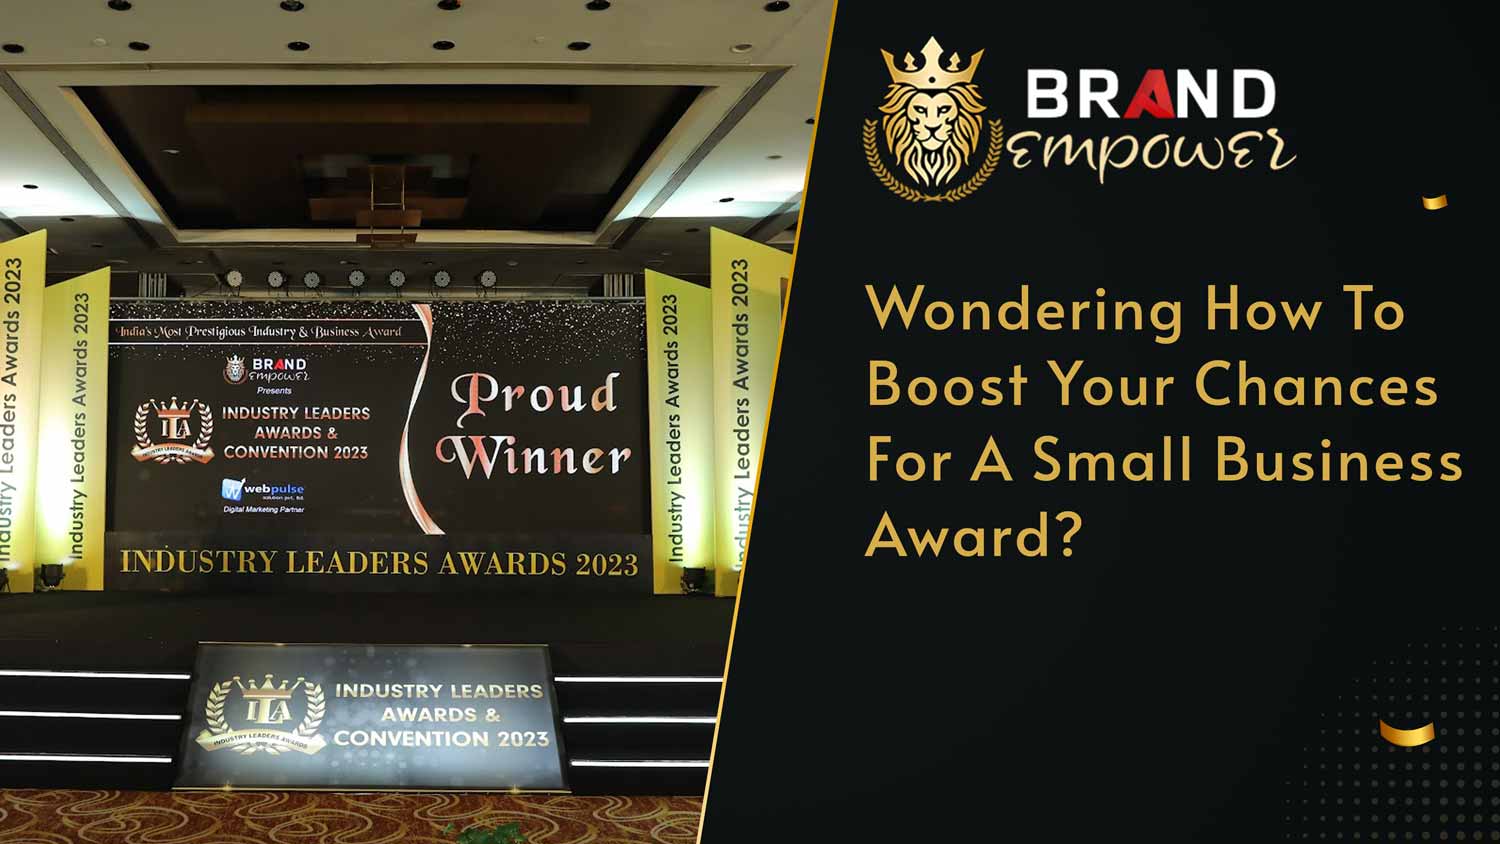 Wondering How To Boost Your Chances For A Small Business Award